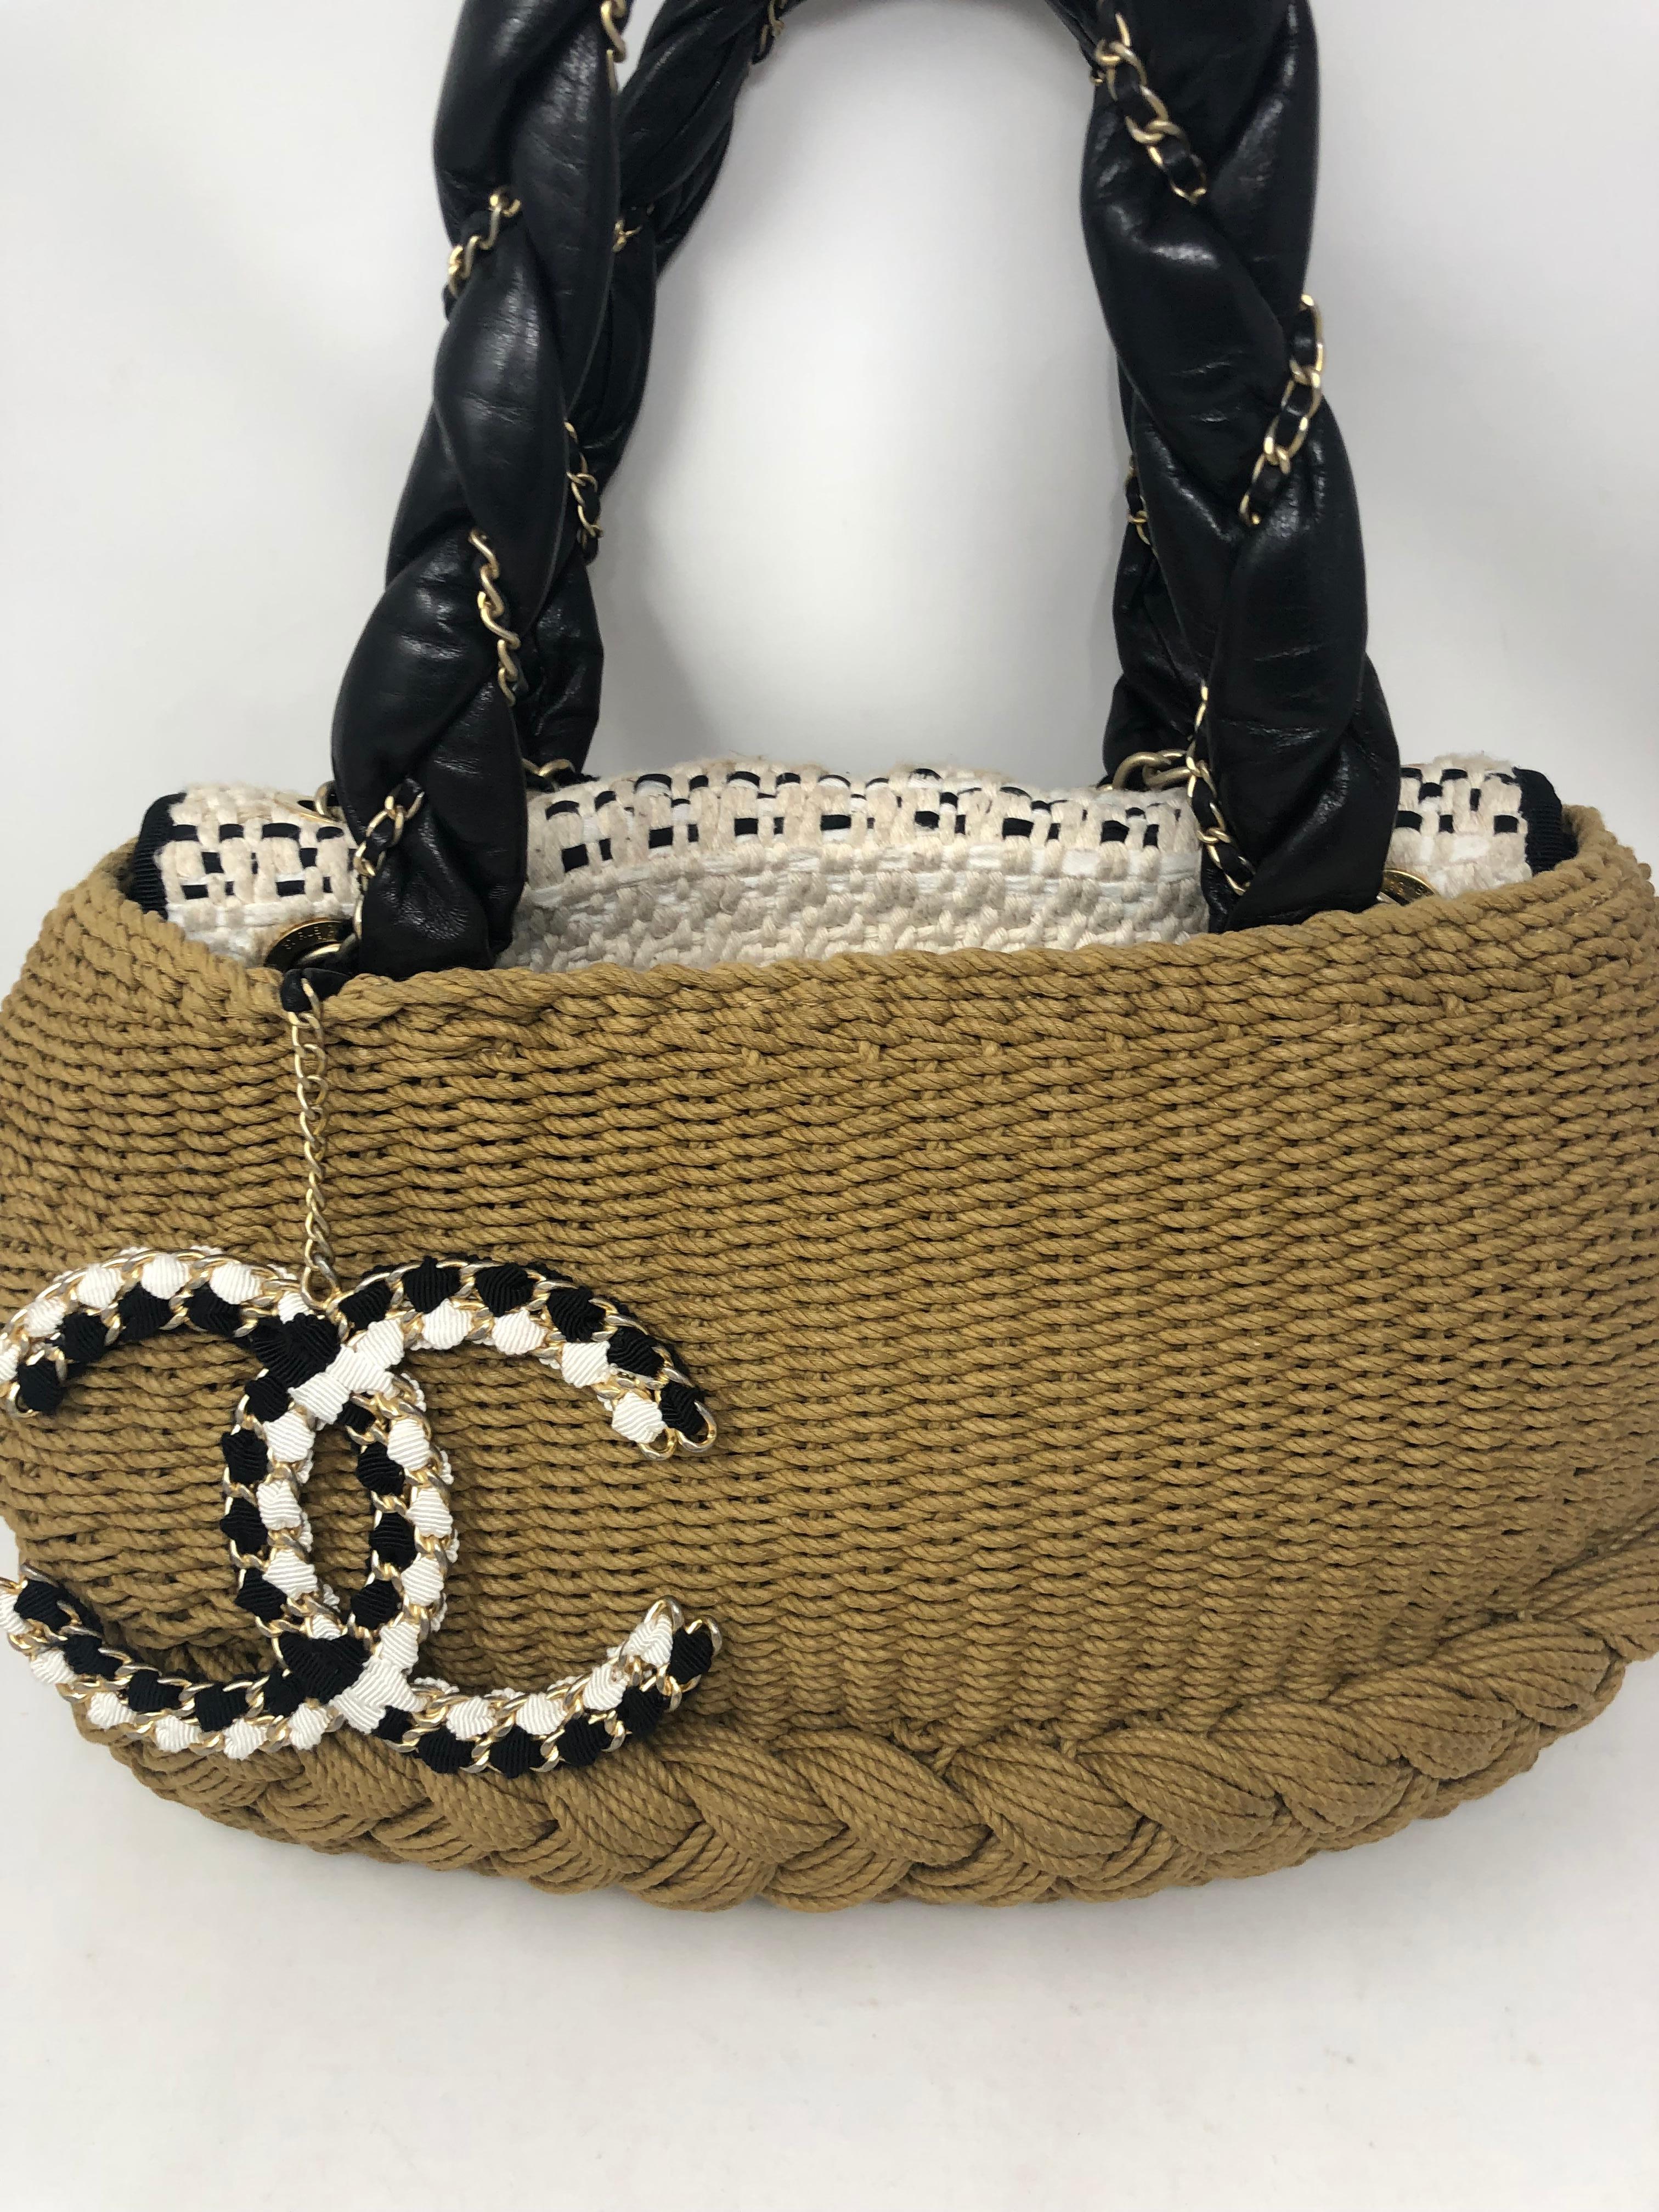 Chanel Runway Wicker Bag with black leather handles. Extra chain straps. Heavy and beautiful bag. Limited and rare piece. Perfect bag for the Hamptons or any resort. Guaranteed authentic. 